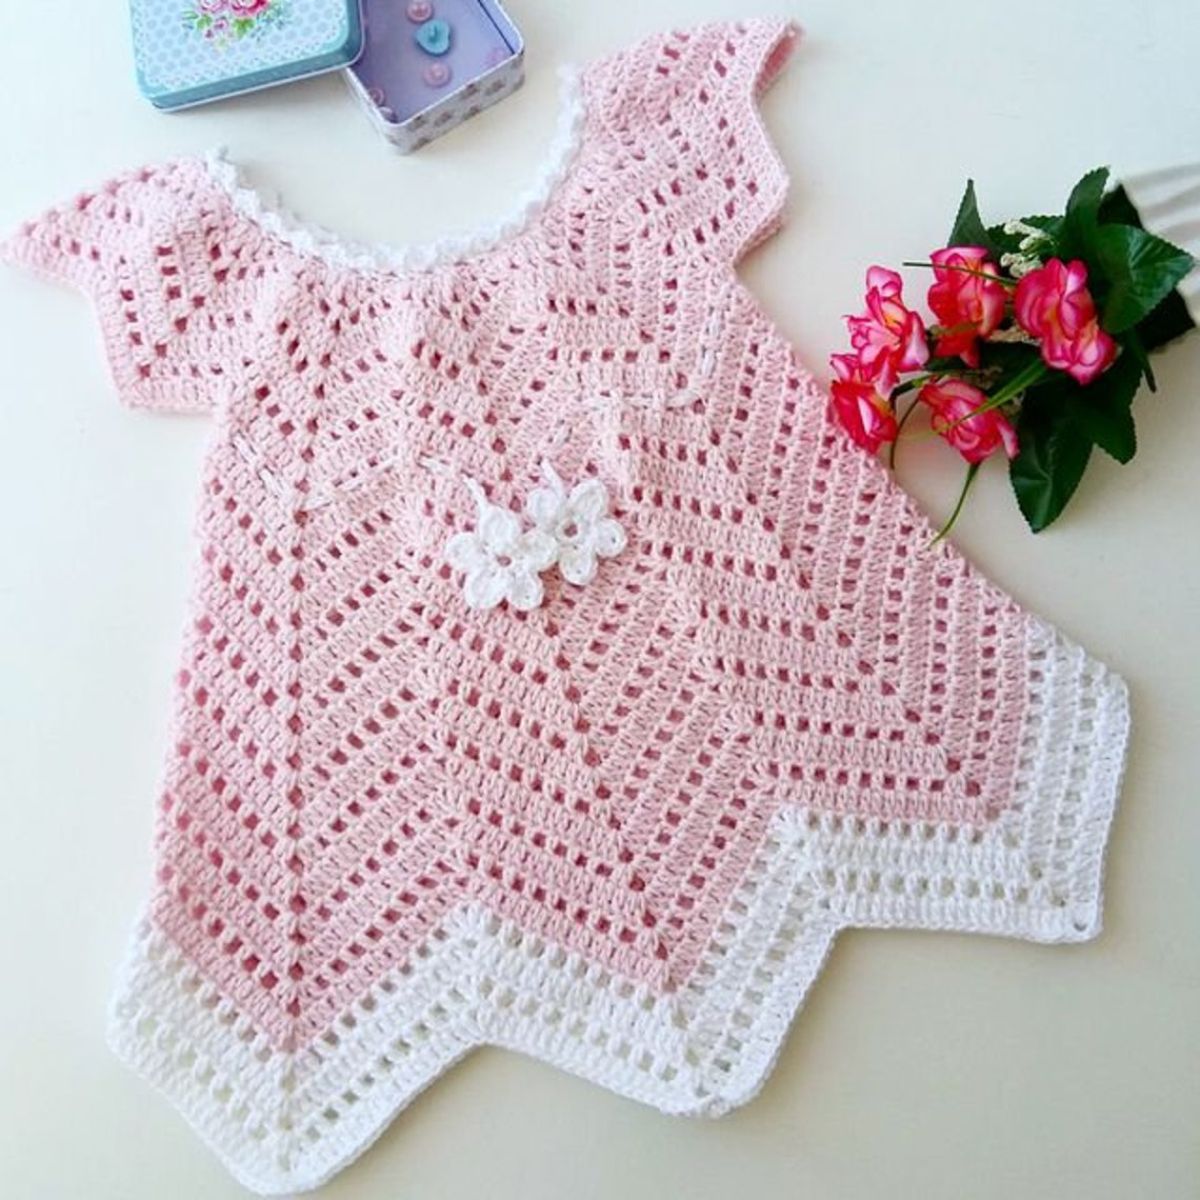 Pink crochet ripple chevron baby dress with short sleeves, white flowers in the middle, and a white zig zag hem.